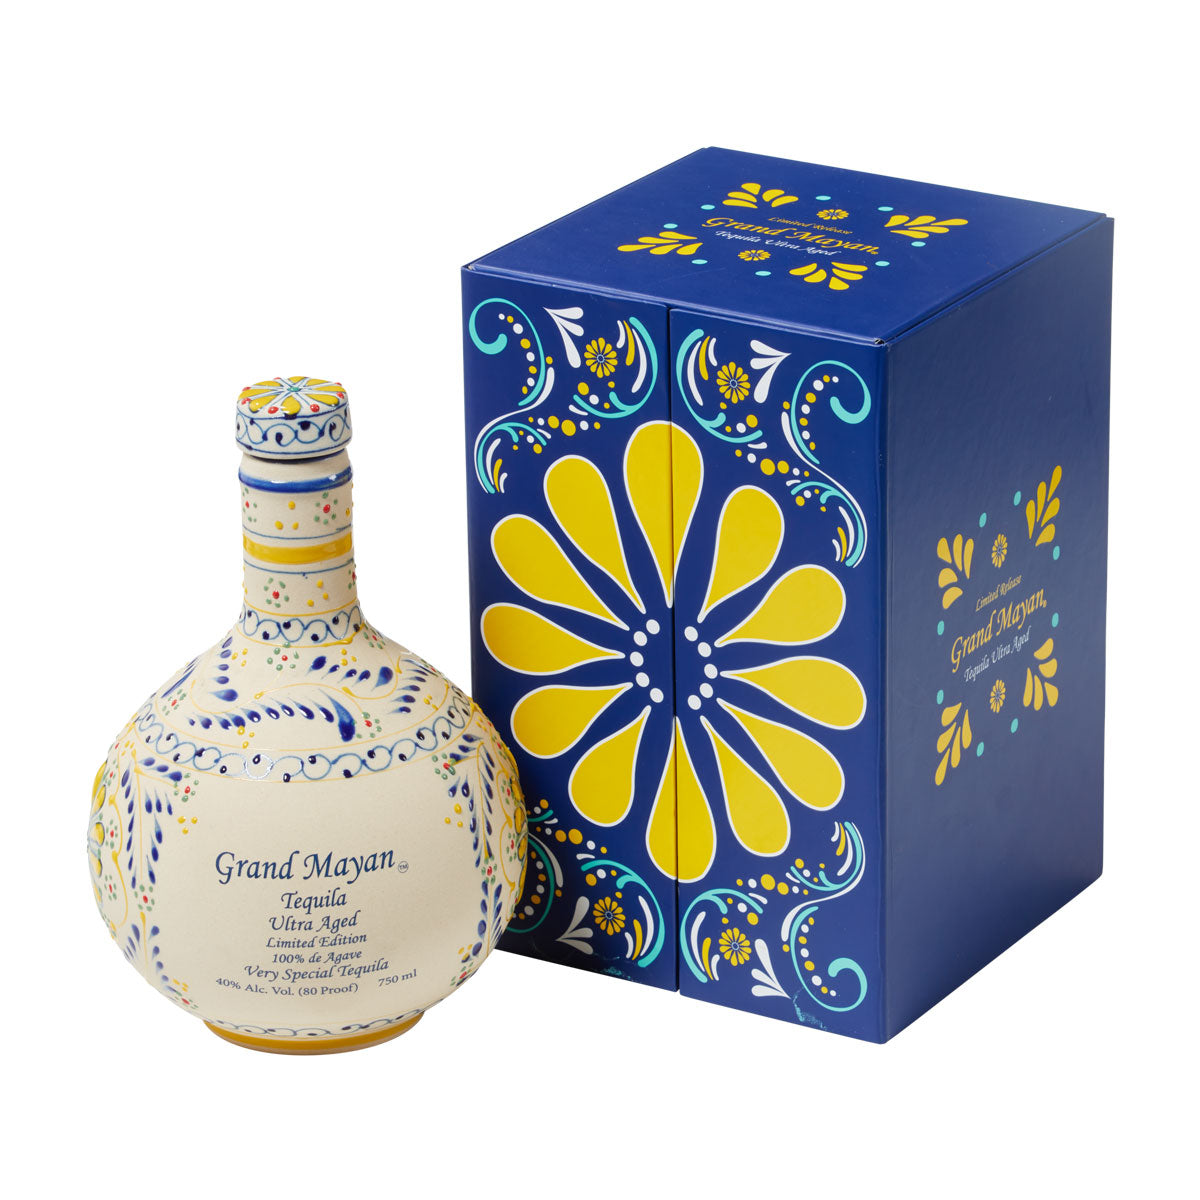 Grand Mayan Ultra Aged Anejo Limted  Edition Tequila 750ml